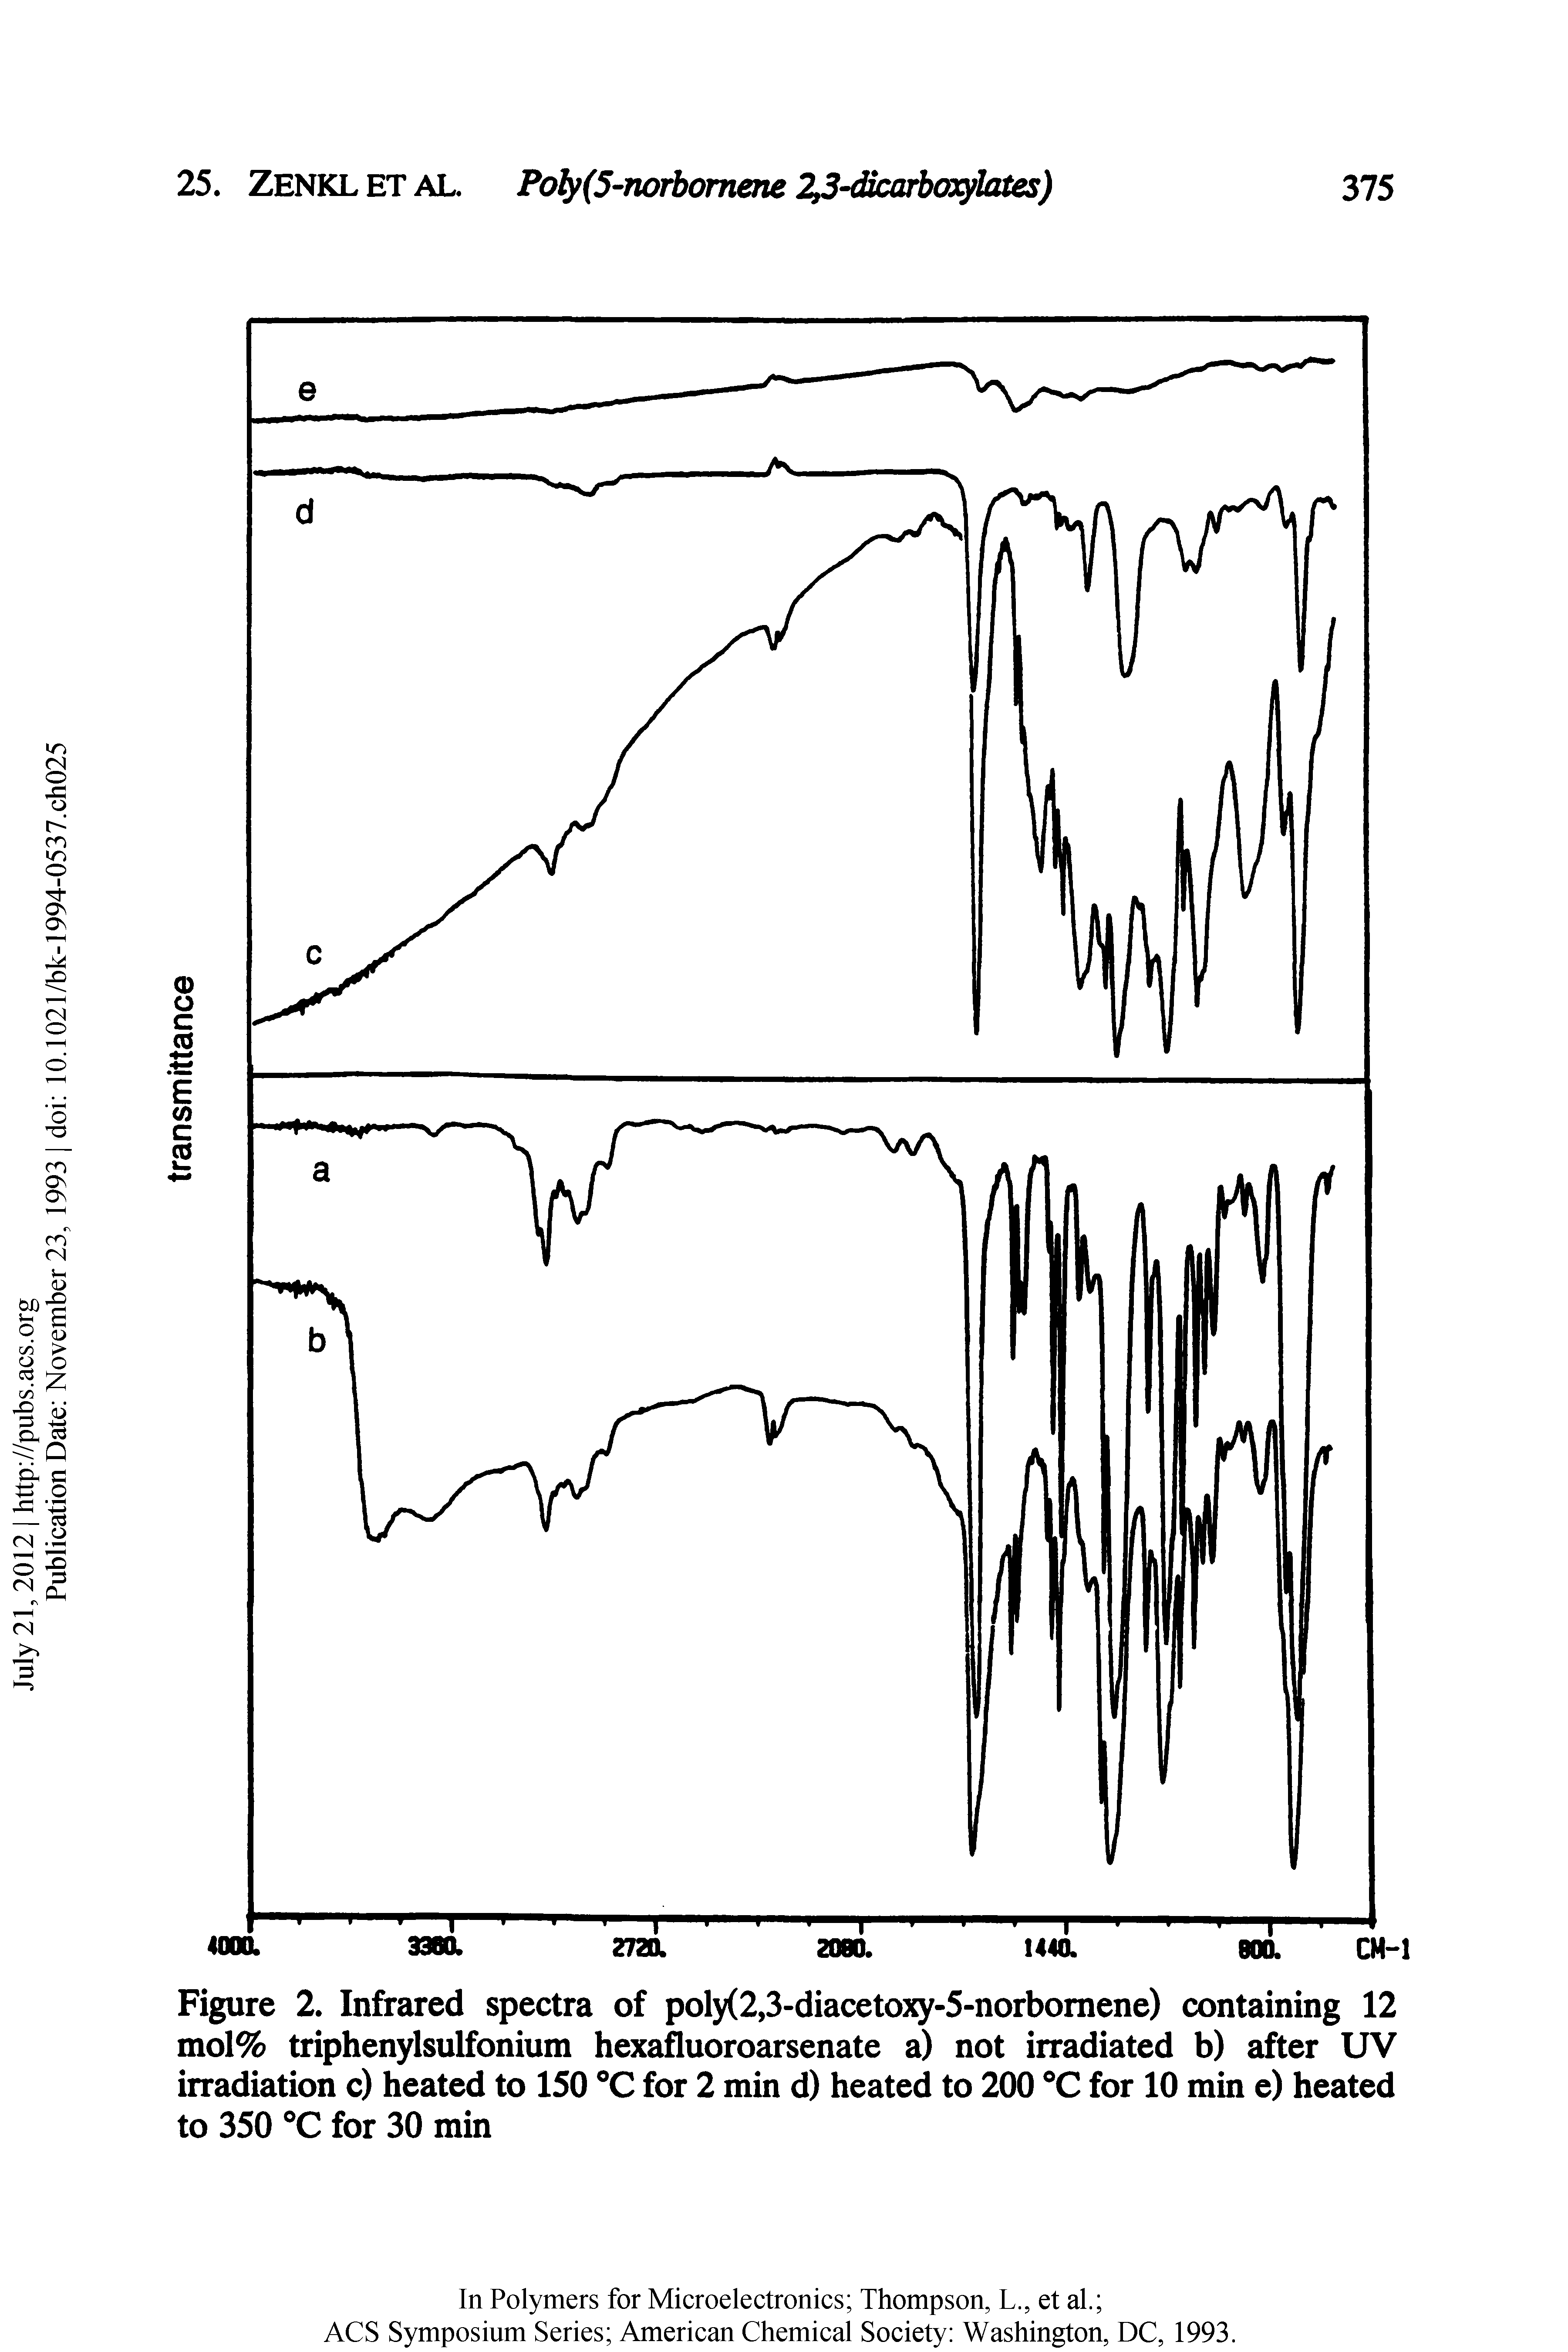 Figure 2. In ared spectra of poly(2,3-ciiaceto -5-norbomene) containing 12 mol% triphenylsulfonium hexafluoroarsenate a) not irradiated b) after UV irradiation c) heated to 150 °C for 2 min d) heated to 200 °C for 10 min e) heated to 350 °C for 30 min...